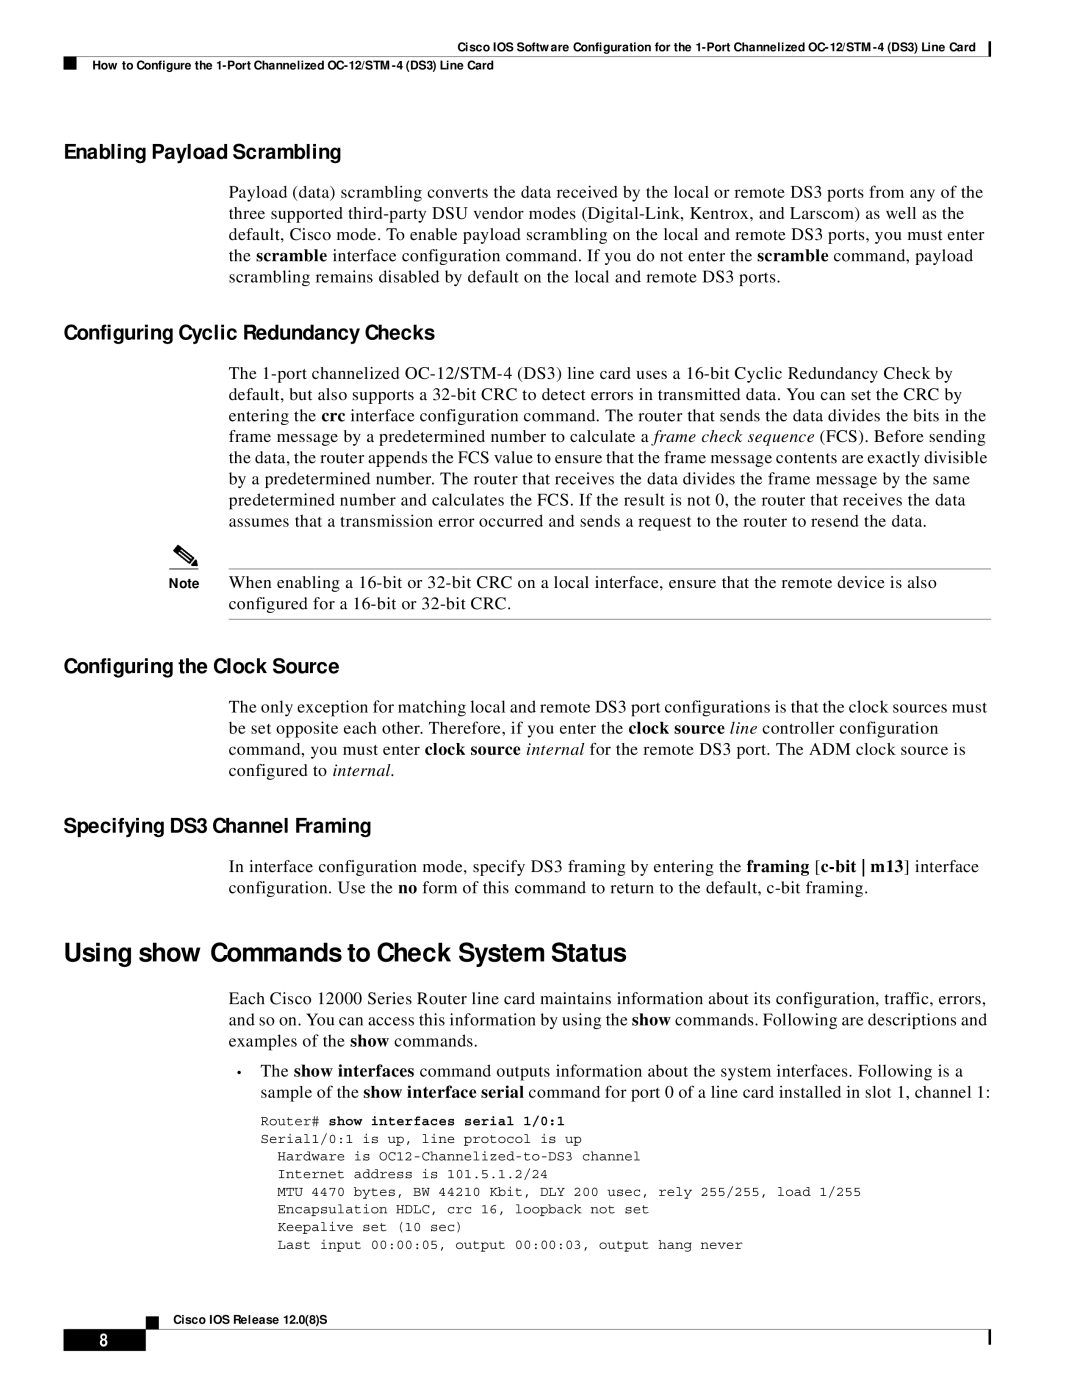 Cisco Systems OC-12/STM-14 manual Using show Commands to Check System Status, Enabling Payload Scrambling 